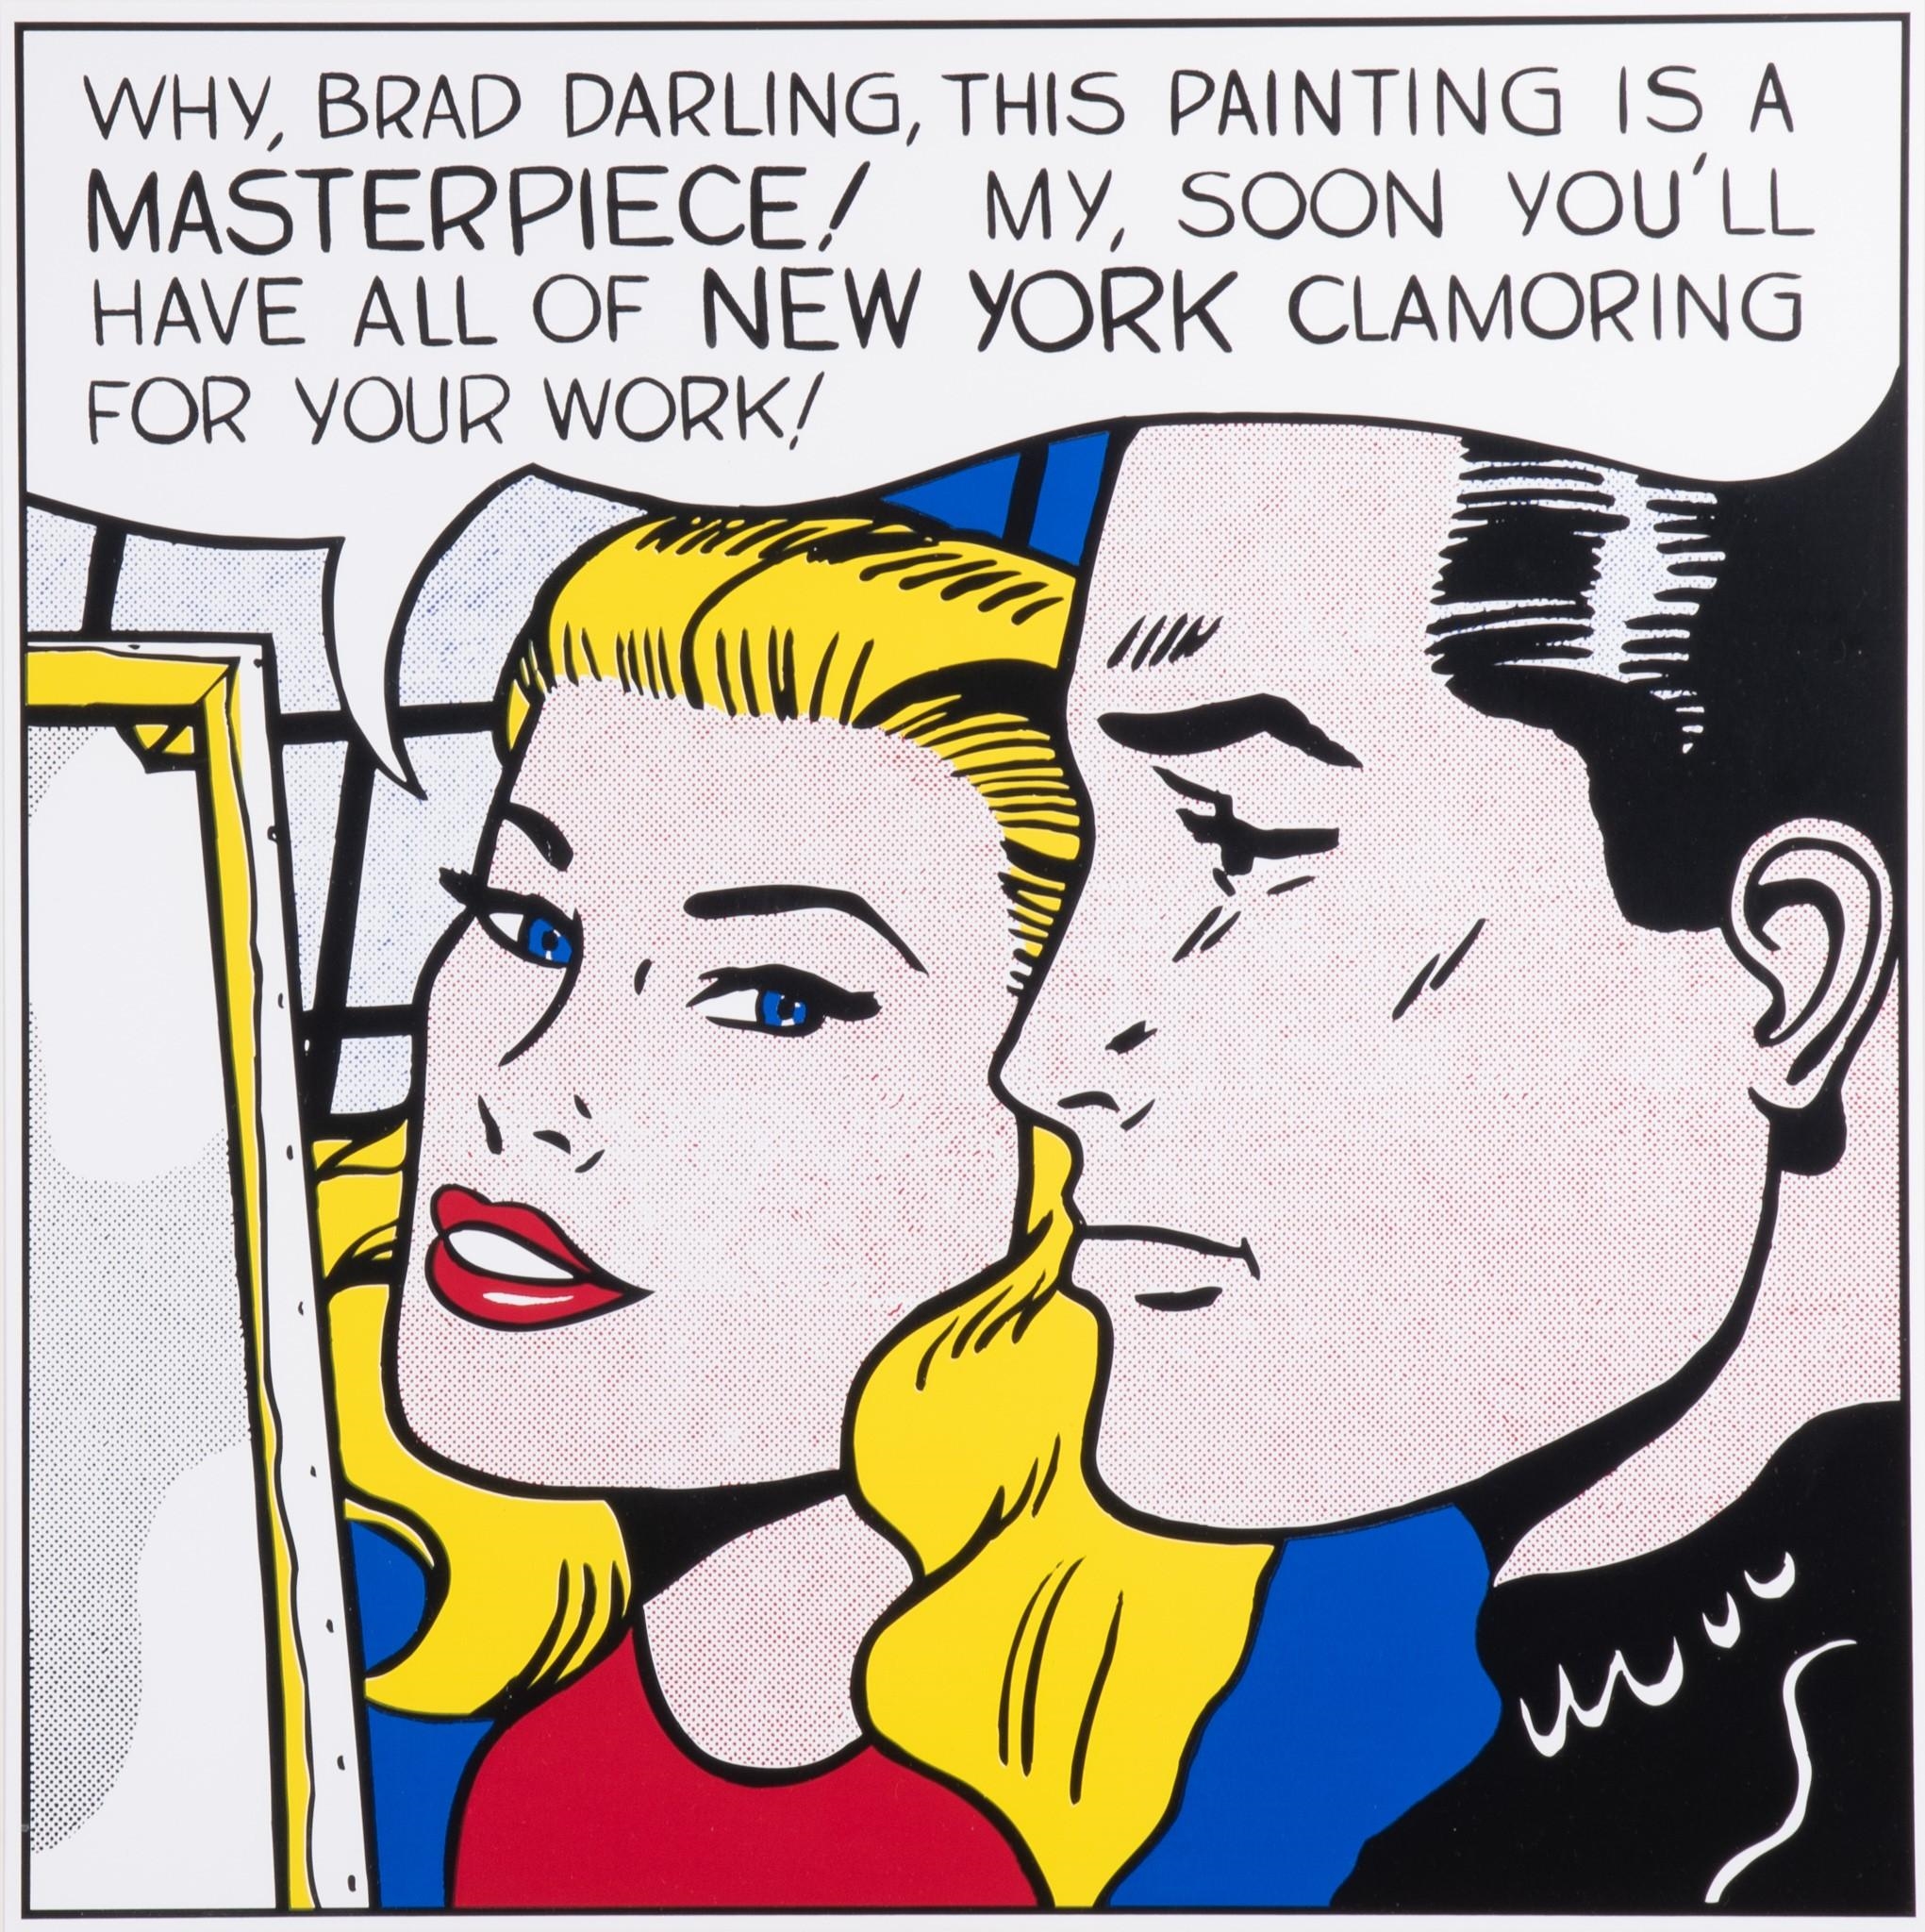 Why Brad Darling, This Painting is a Masterpiece! My, Soon You'll Have all of New York Clamoring for Your Work! by Roy Lichtenstein